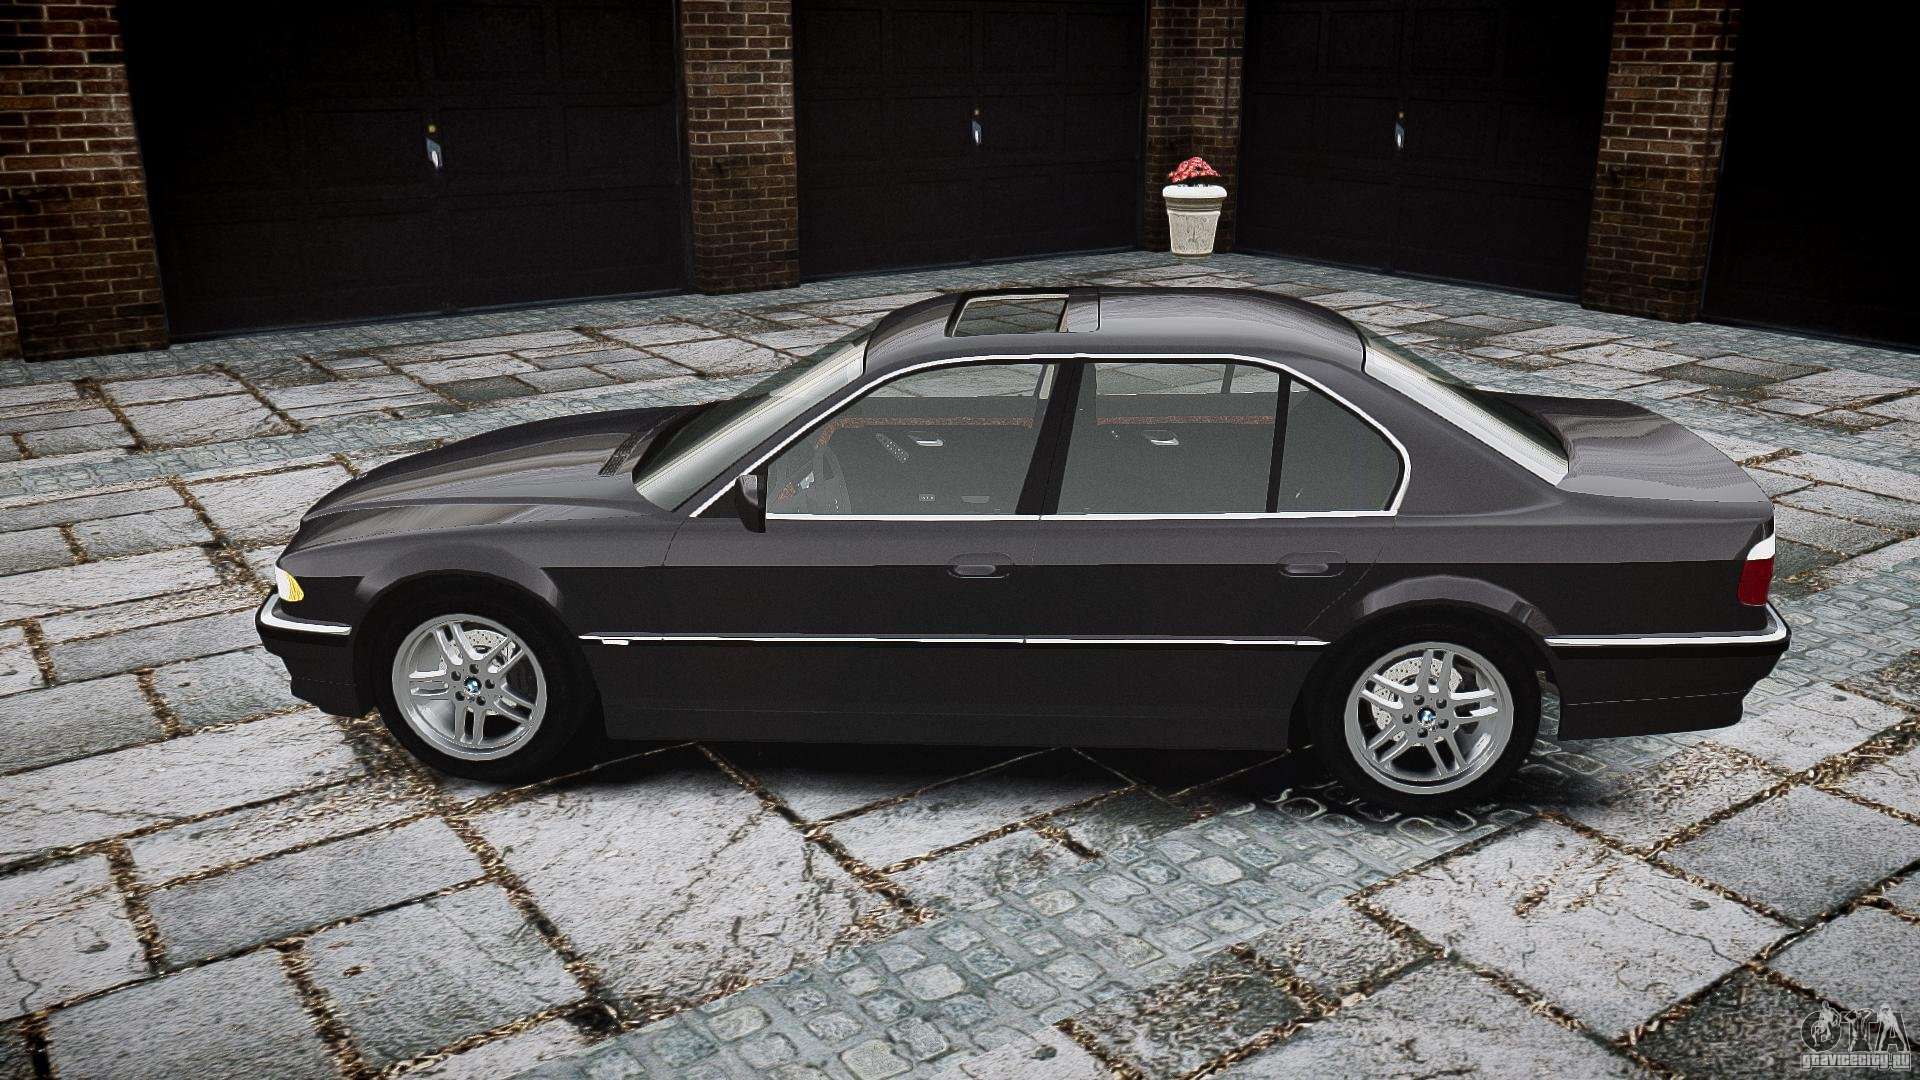 Request] BMW E38 740iL V8 - Legacy Motorsport - Official Forza Community  Forums